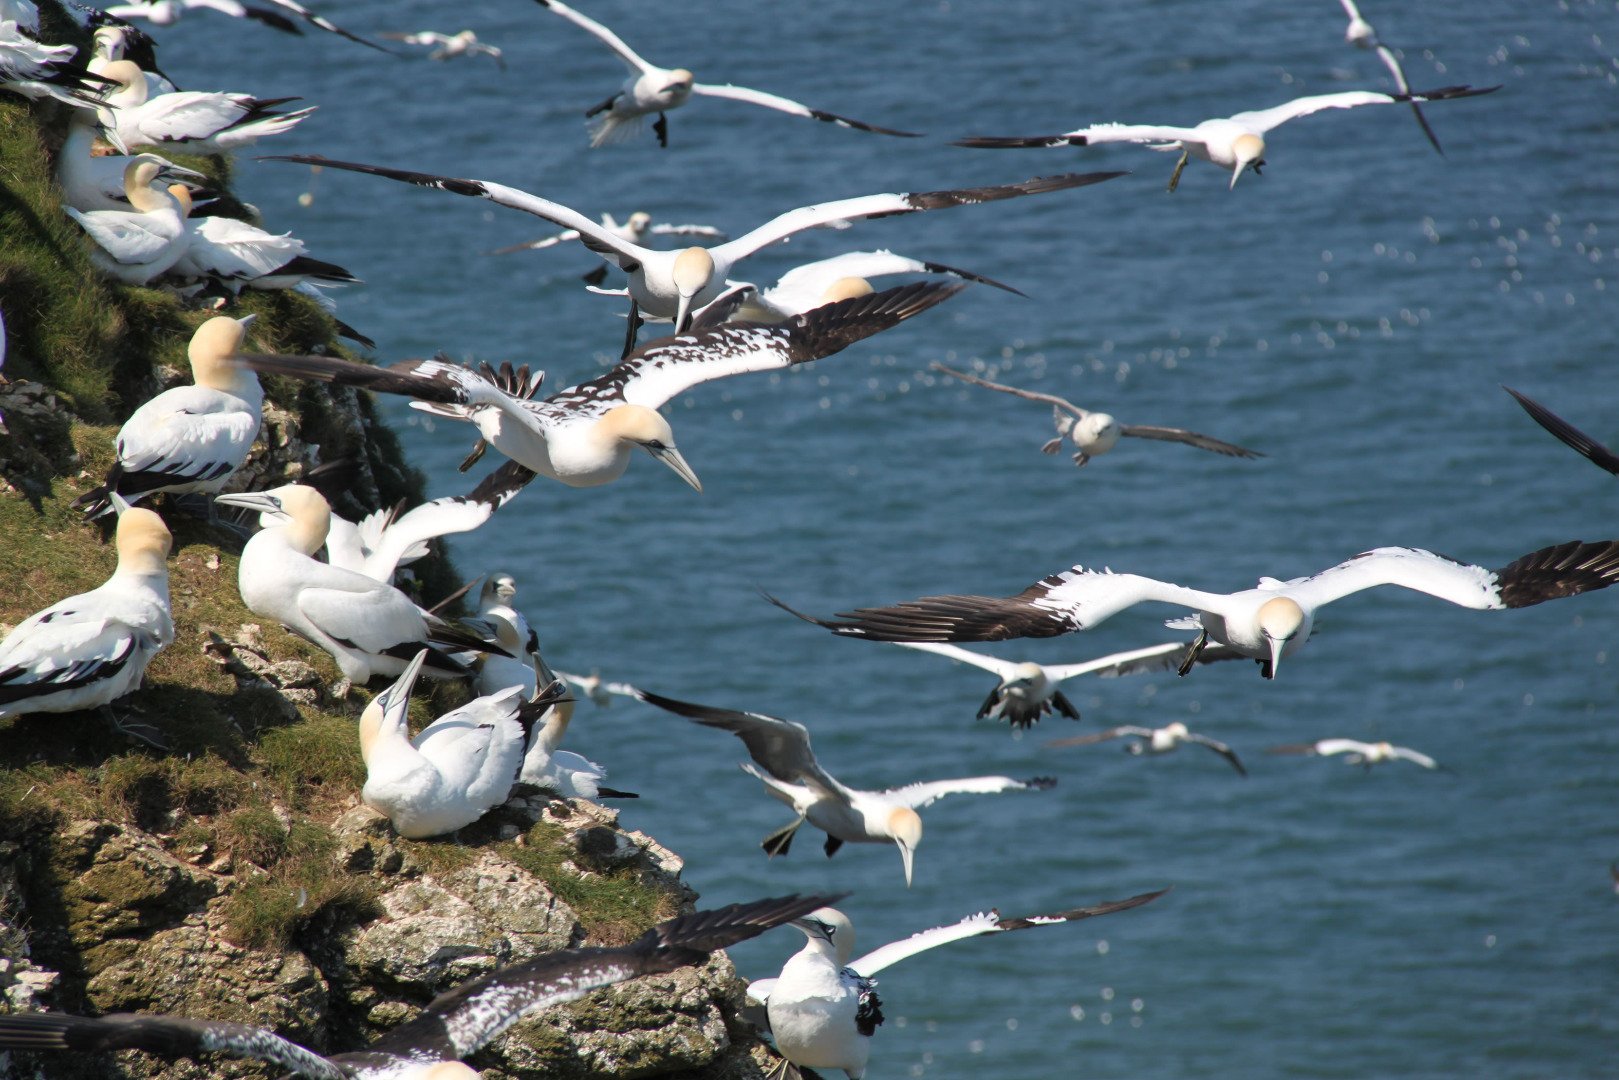 Image name gannets at bempton martin batt the 27 image from the post Yorkshire's Top 10 Natural Highlights in Yorkshire.com.